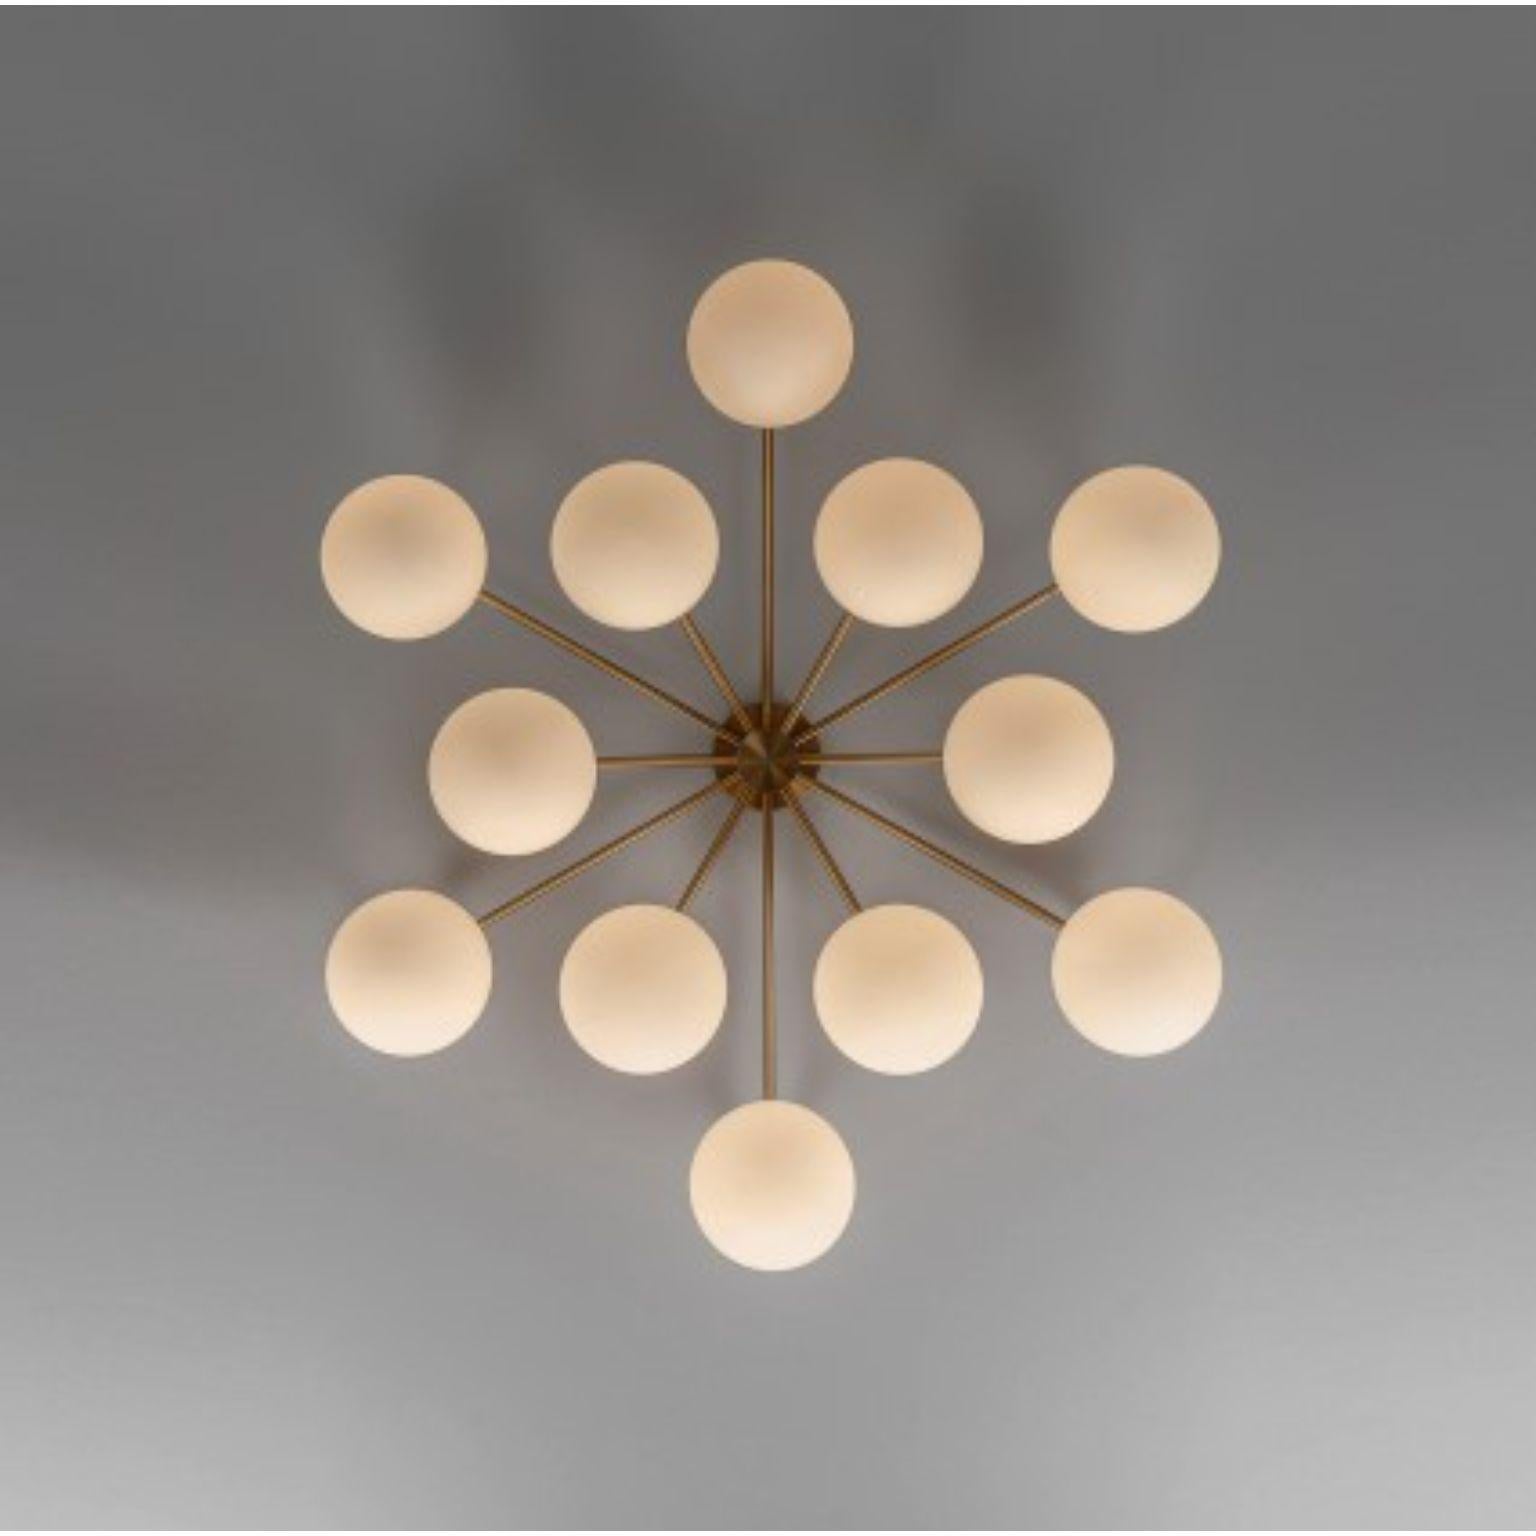 Orion round chandelier by Schwung
Dimensions: D 121.4 x H 122.5cm
Materials: Brass, Opal glass
Weight: 22.6 kg

Finishes available: Black gunmetal, polished nickel, brass
Other sizes available.

 Schwung is a german word, and loosely defined, means